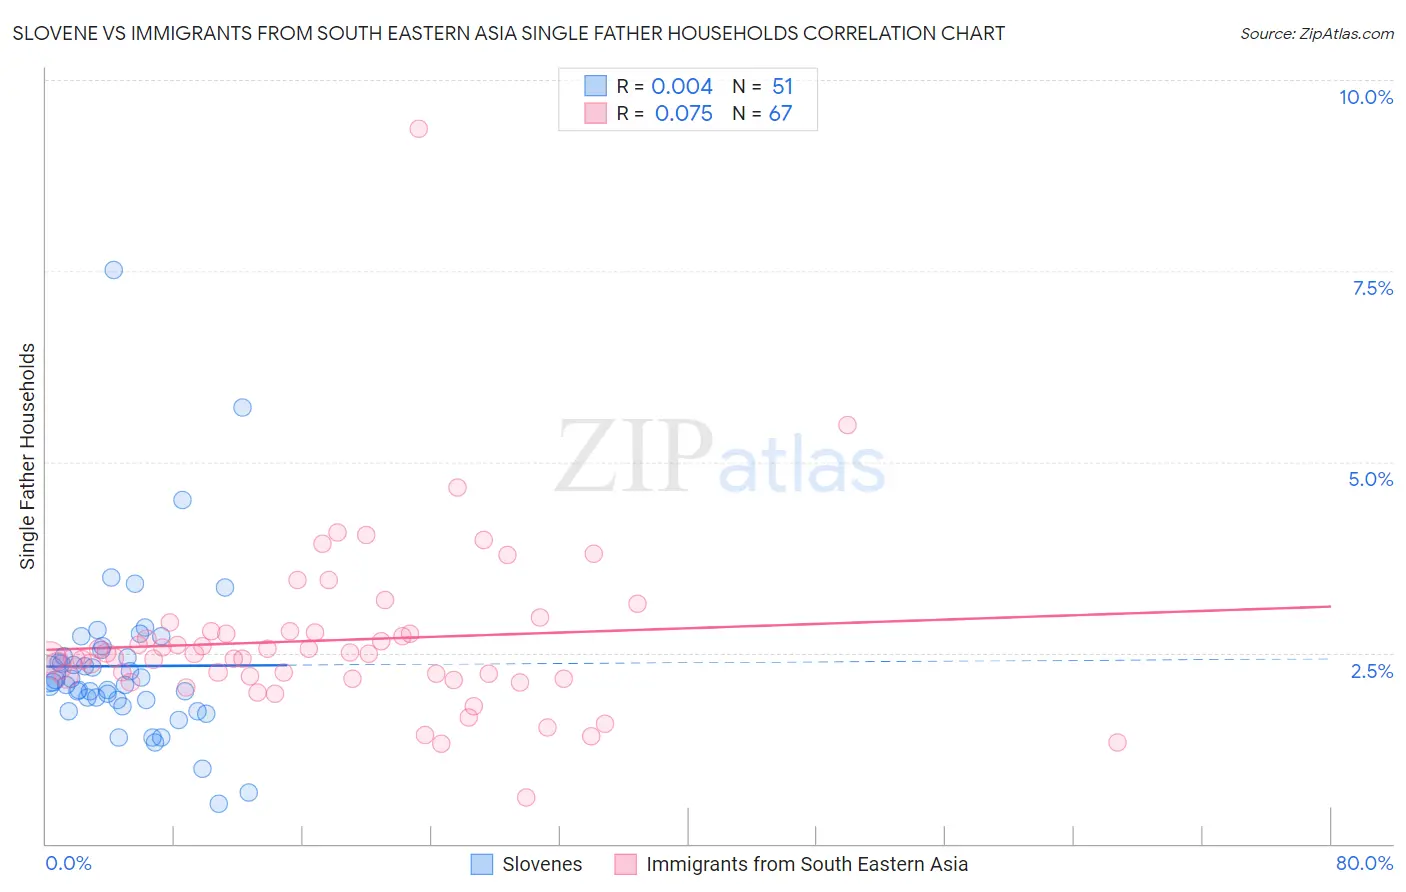 Slovene vs Immigrants from South Eastern Asia Single Father Households